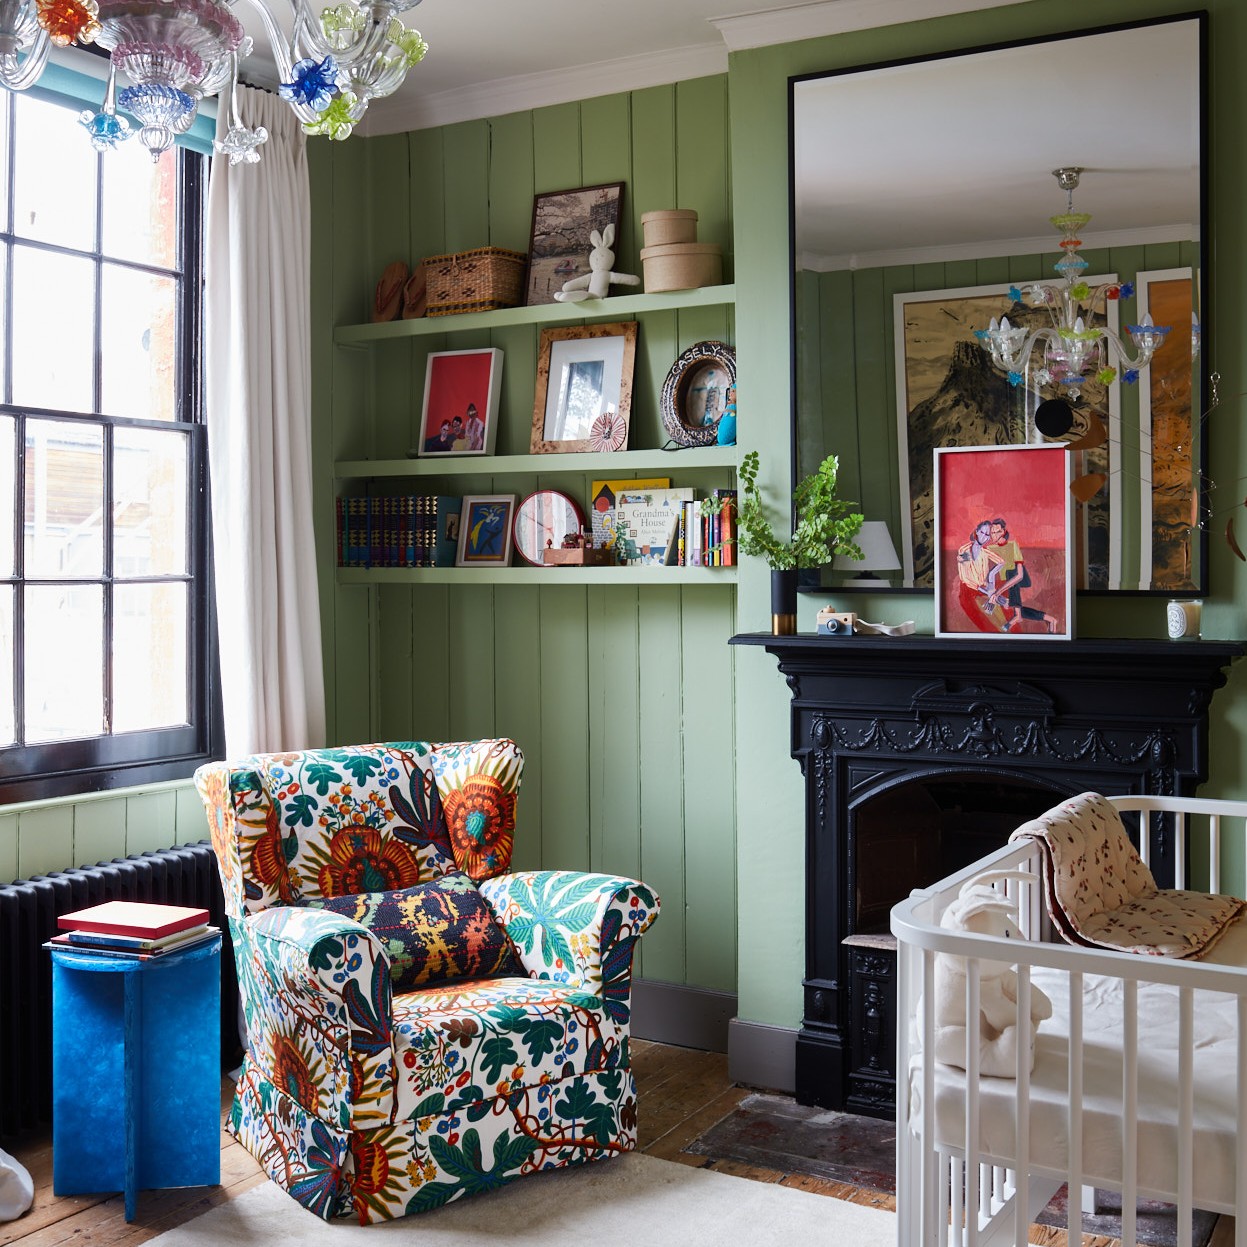 The preview image of an These 11 Kids’ Room Ideas Will Bring Out Your Inner Child article